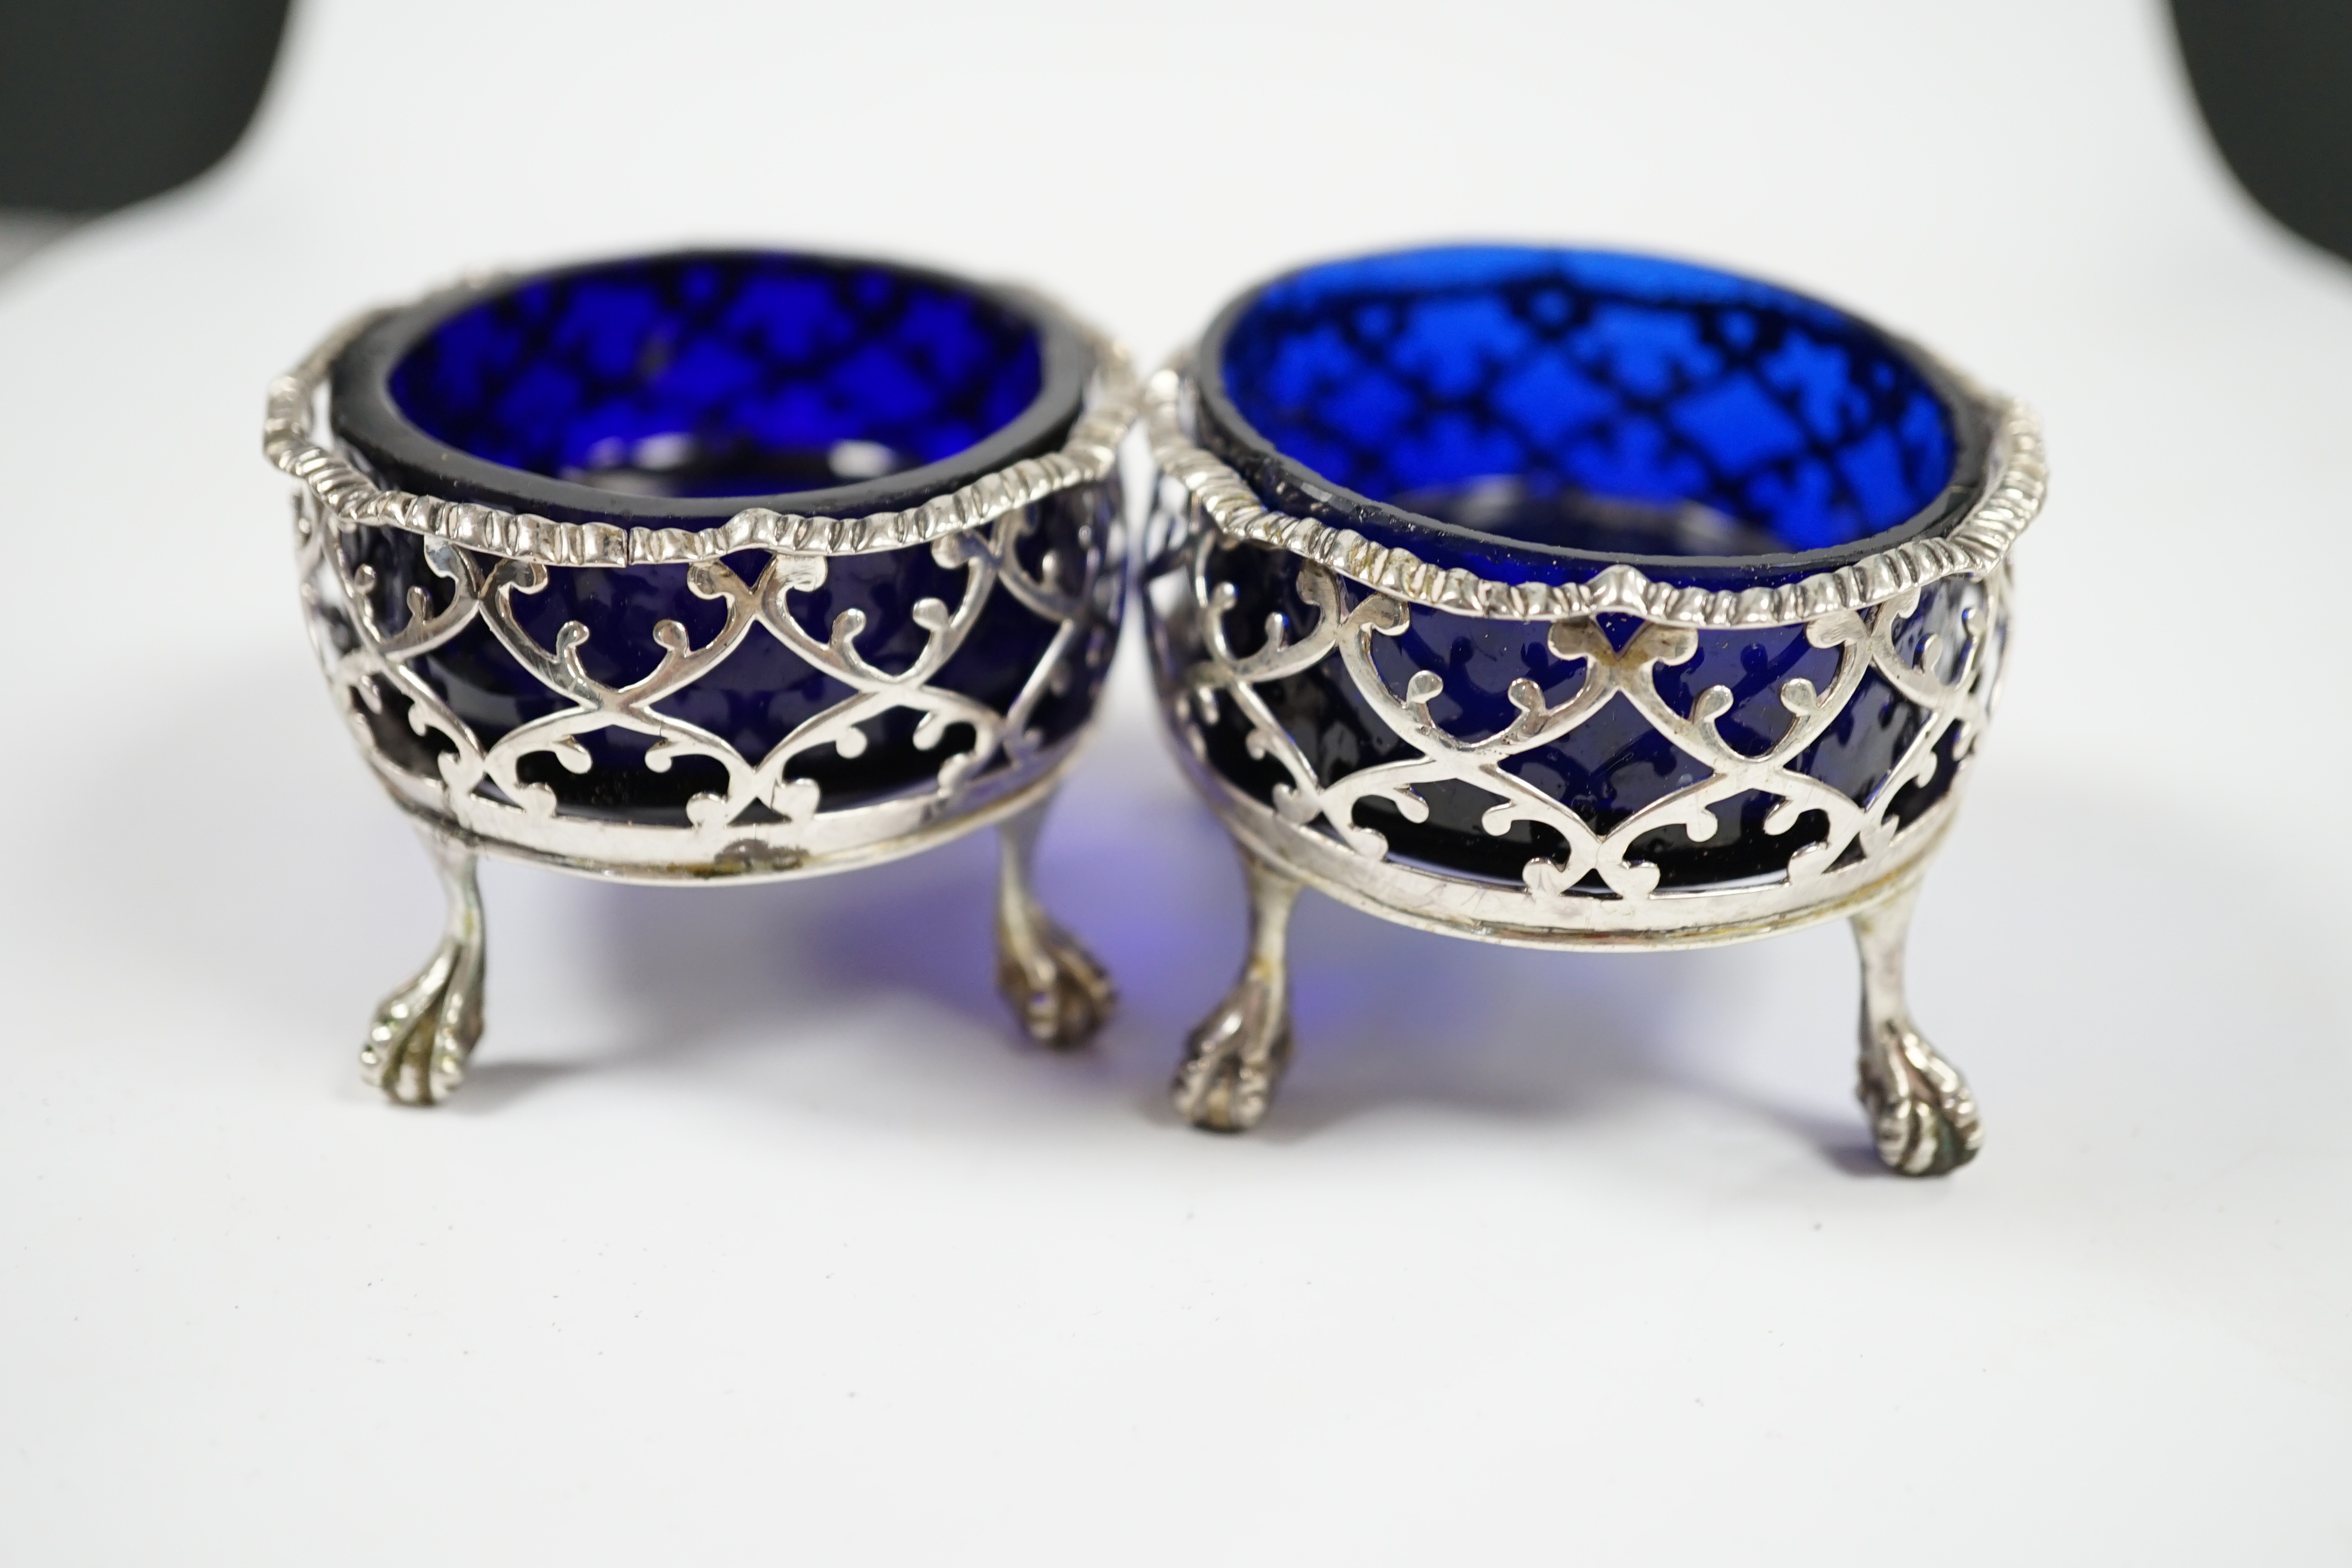 A pair of late George II pierced silver oval salts, by Robert & David Hennell I, London, 1759, with associated blue glass liners, 83mm. Condition - poor